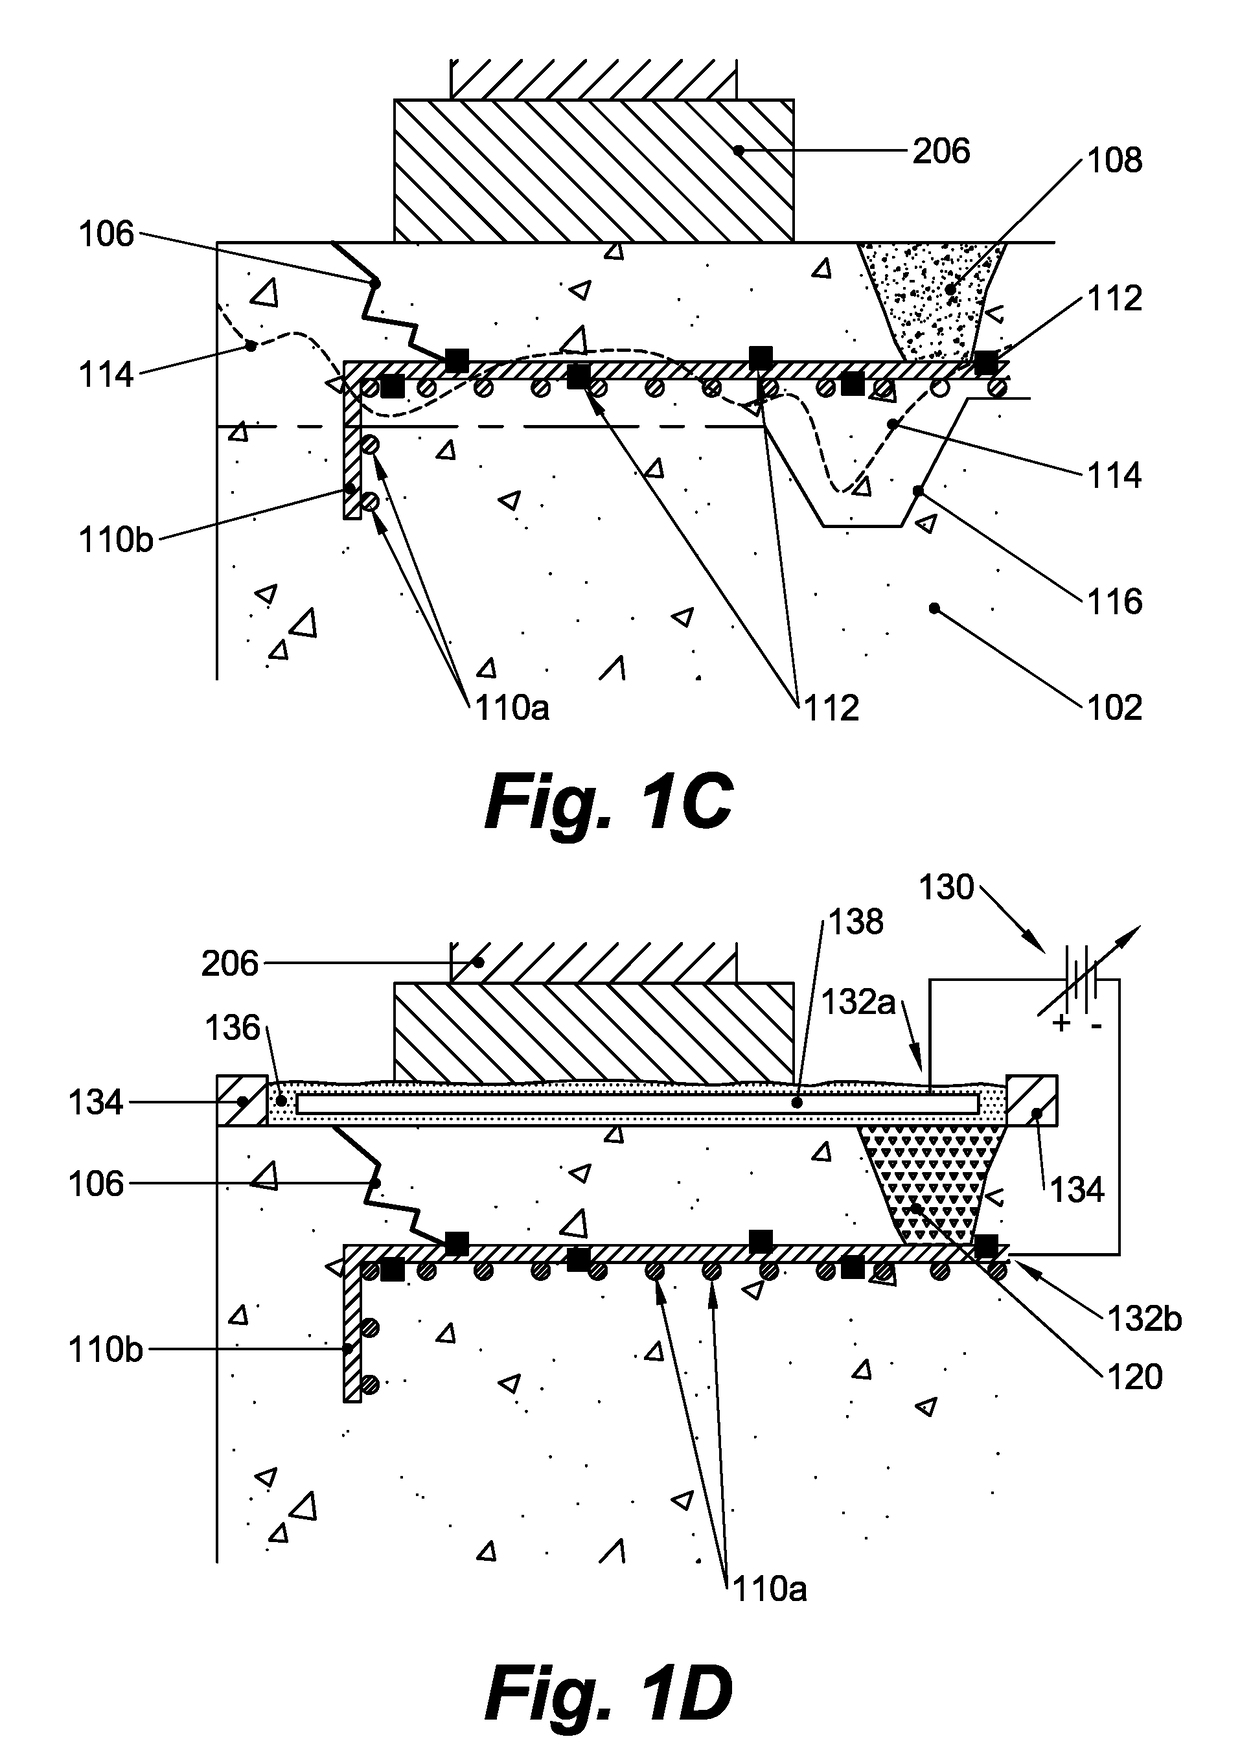 Method of repairing steel reinforced concrete structure affected by chloride induced corrosion